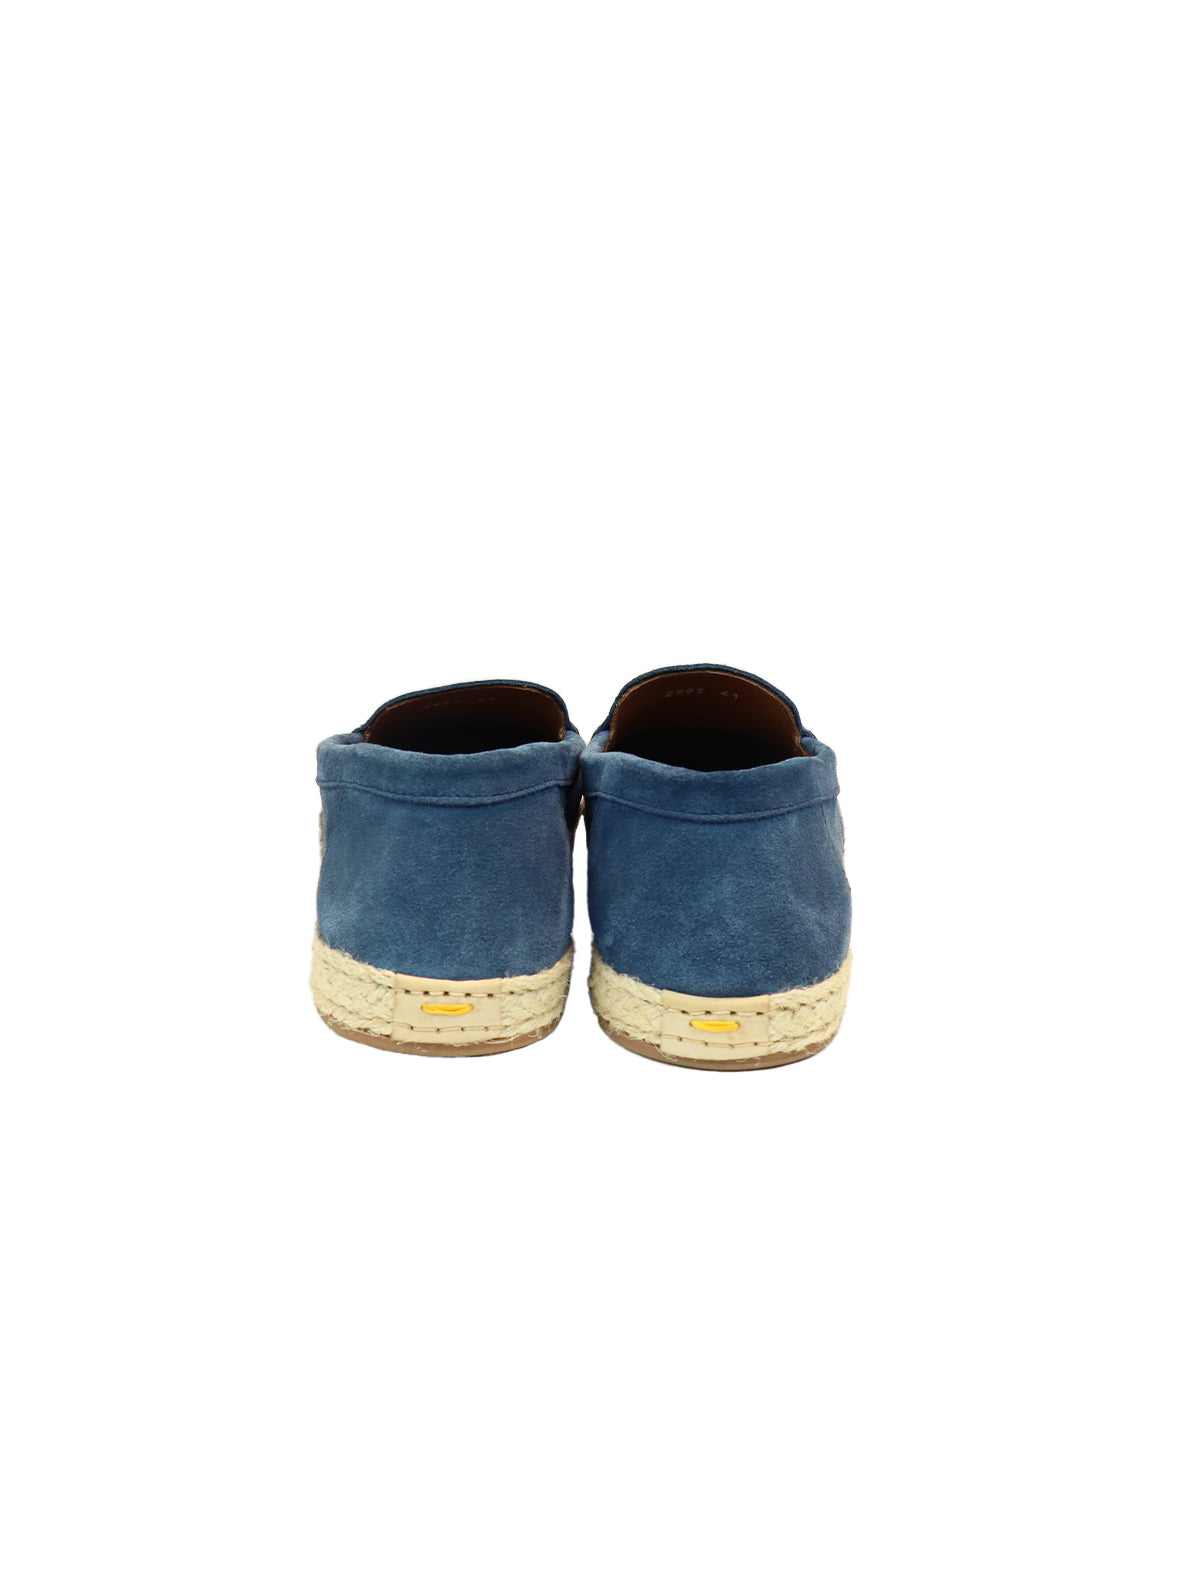 DOUCAL'S Suede Espadrilles in Blue